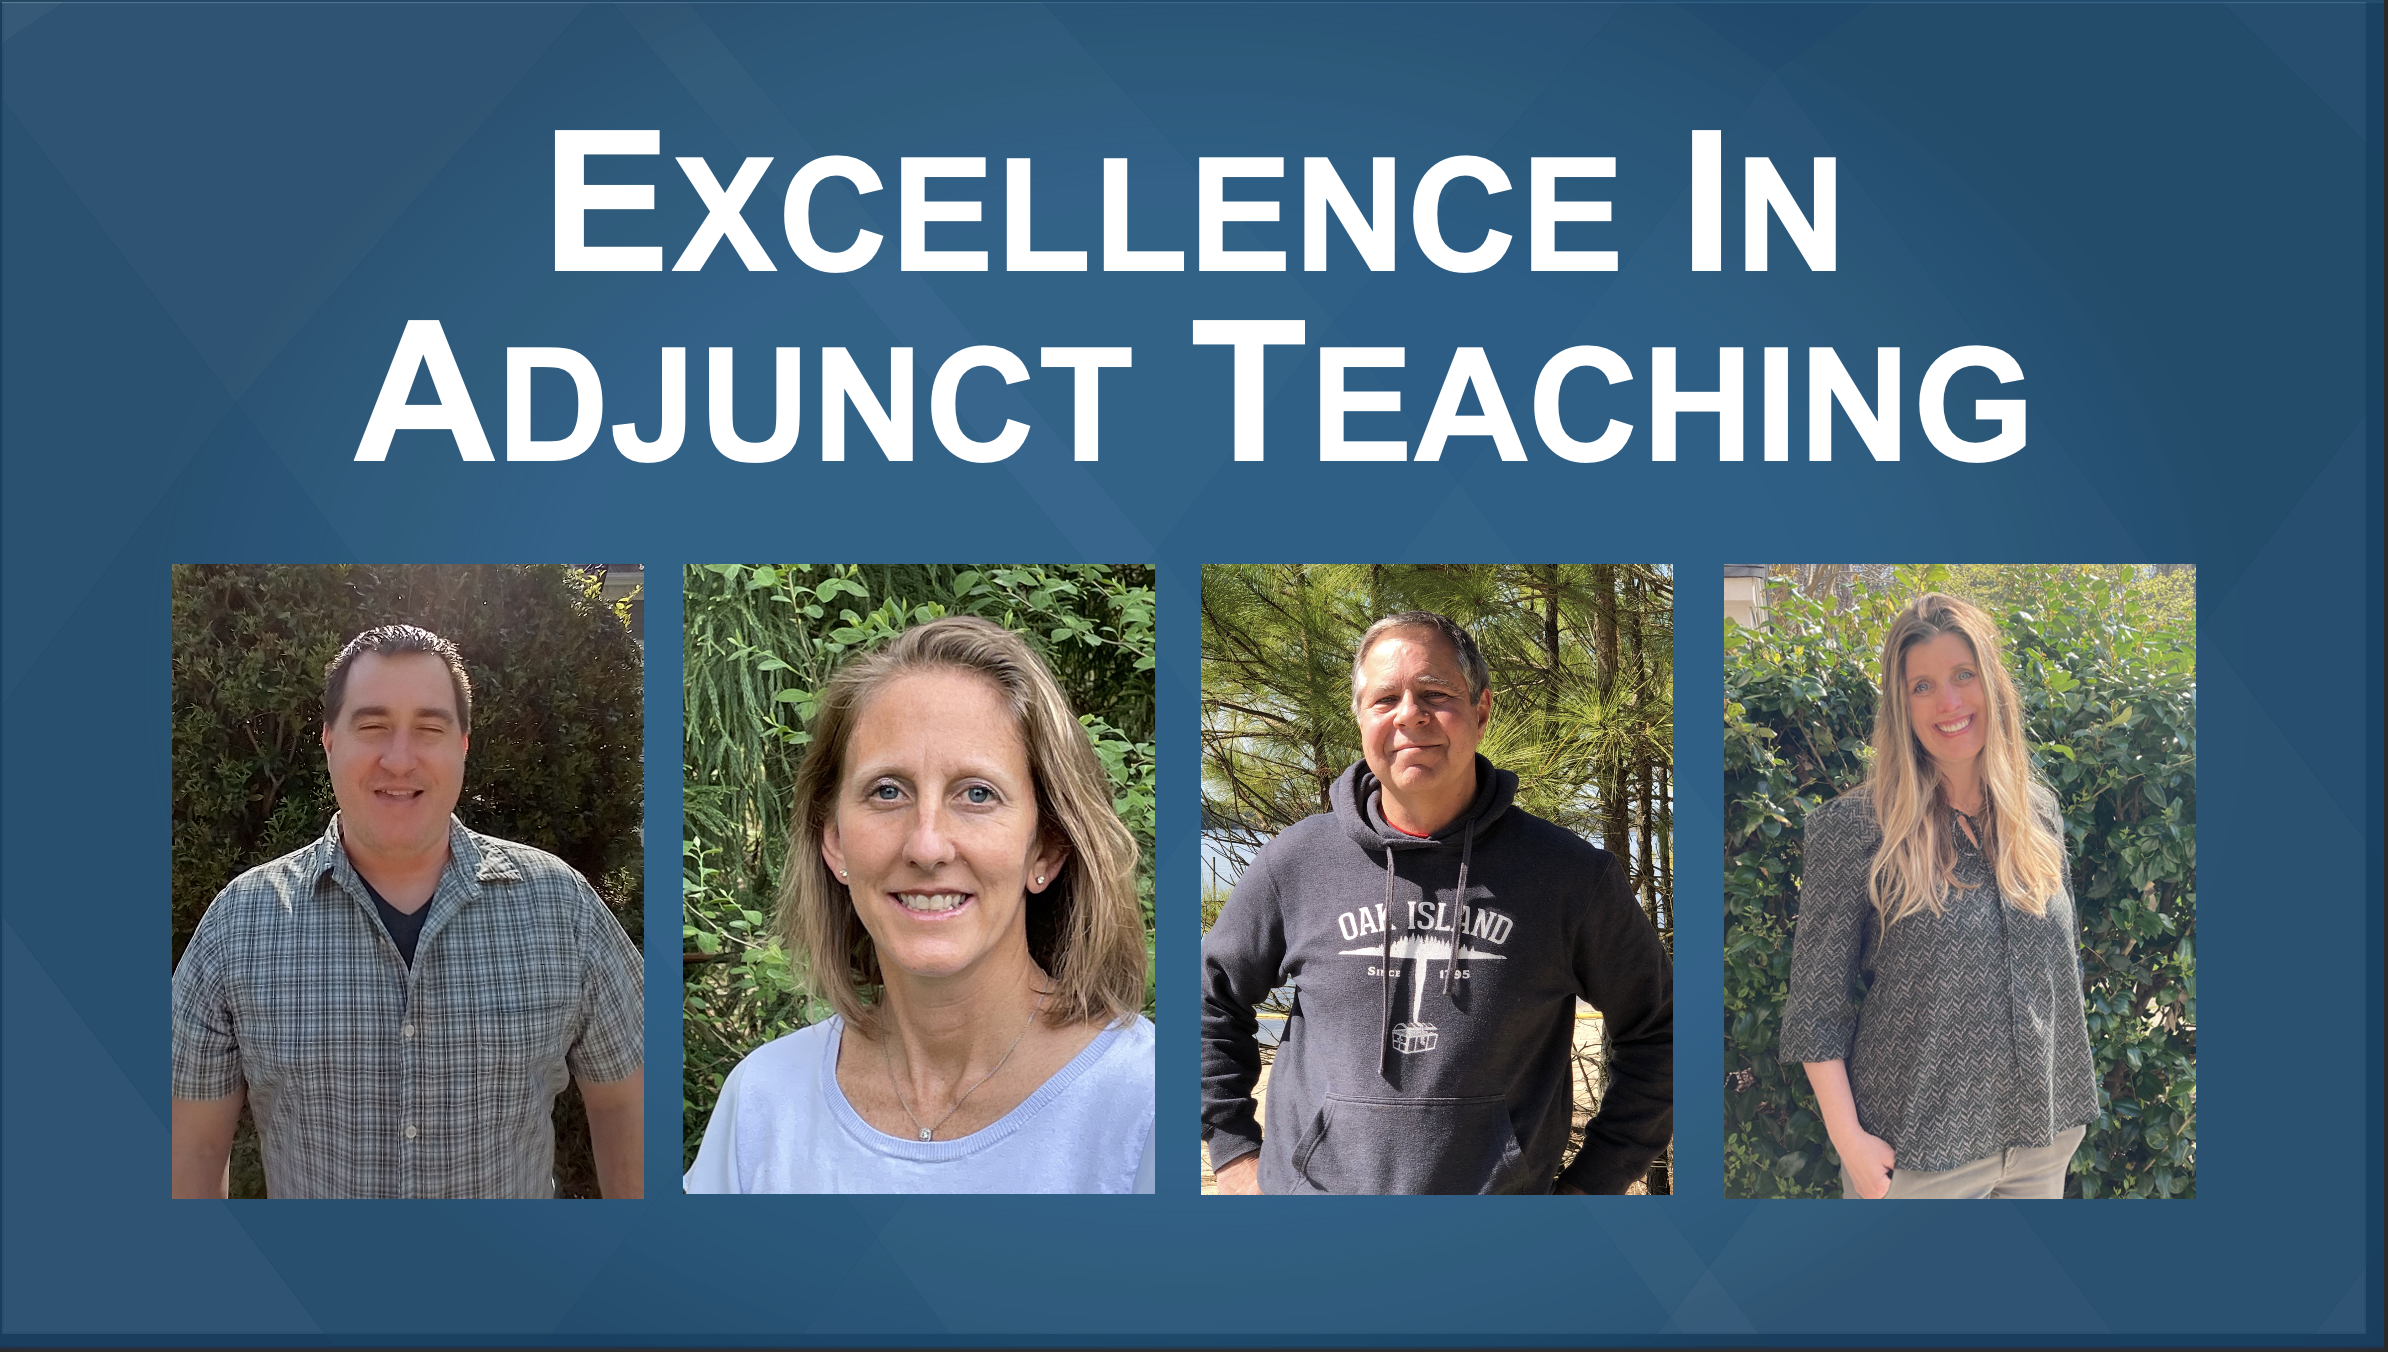 Excellence in Adjunct Teaching